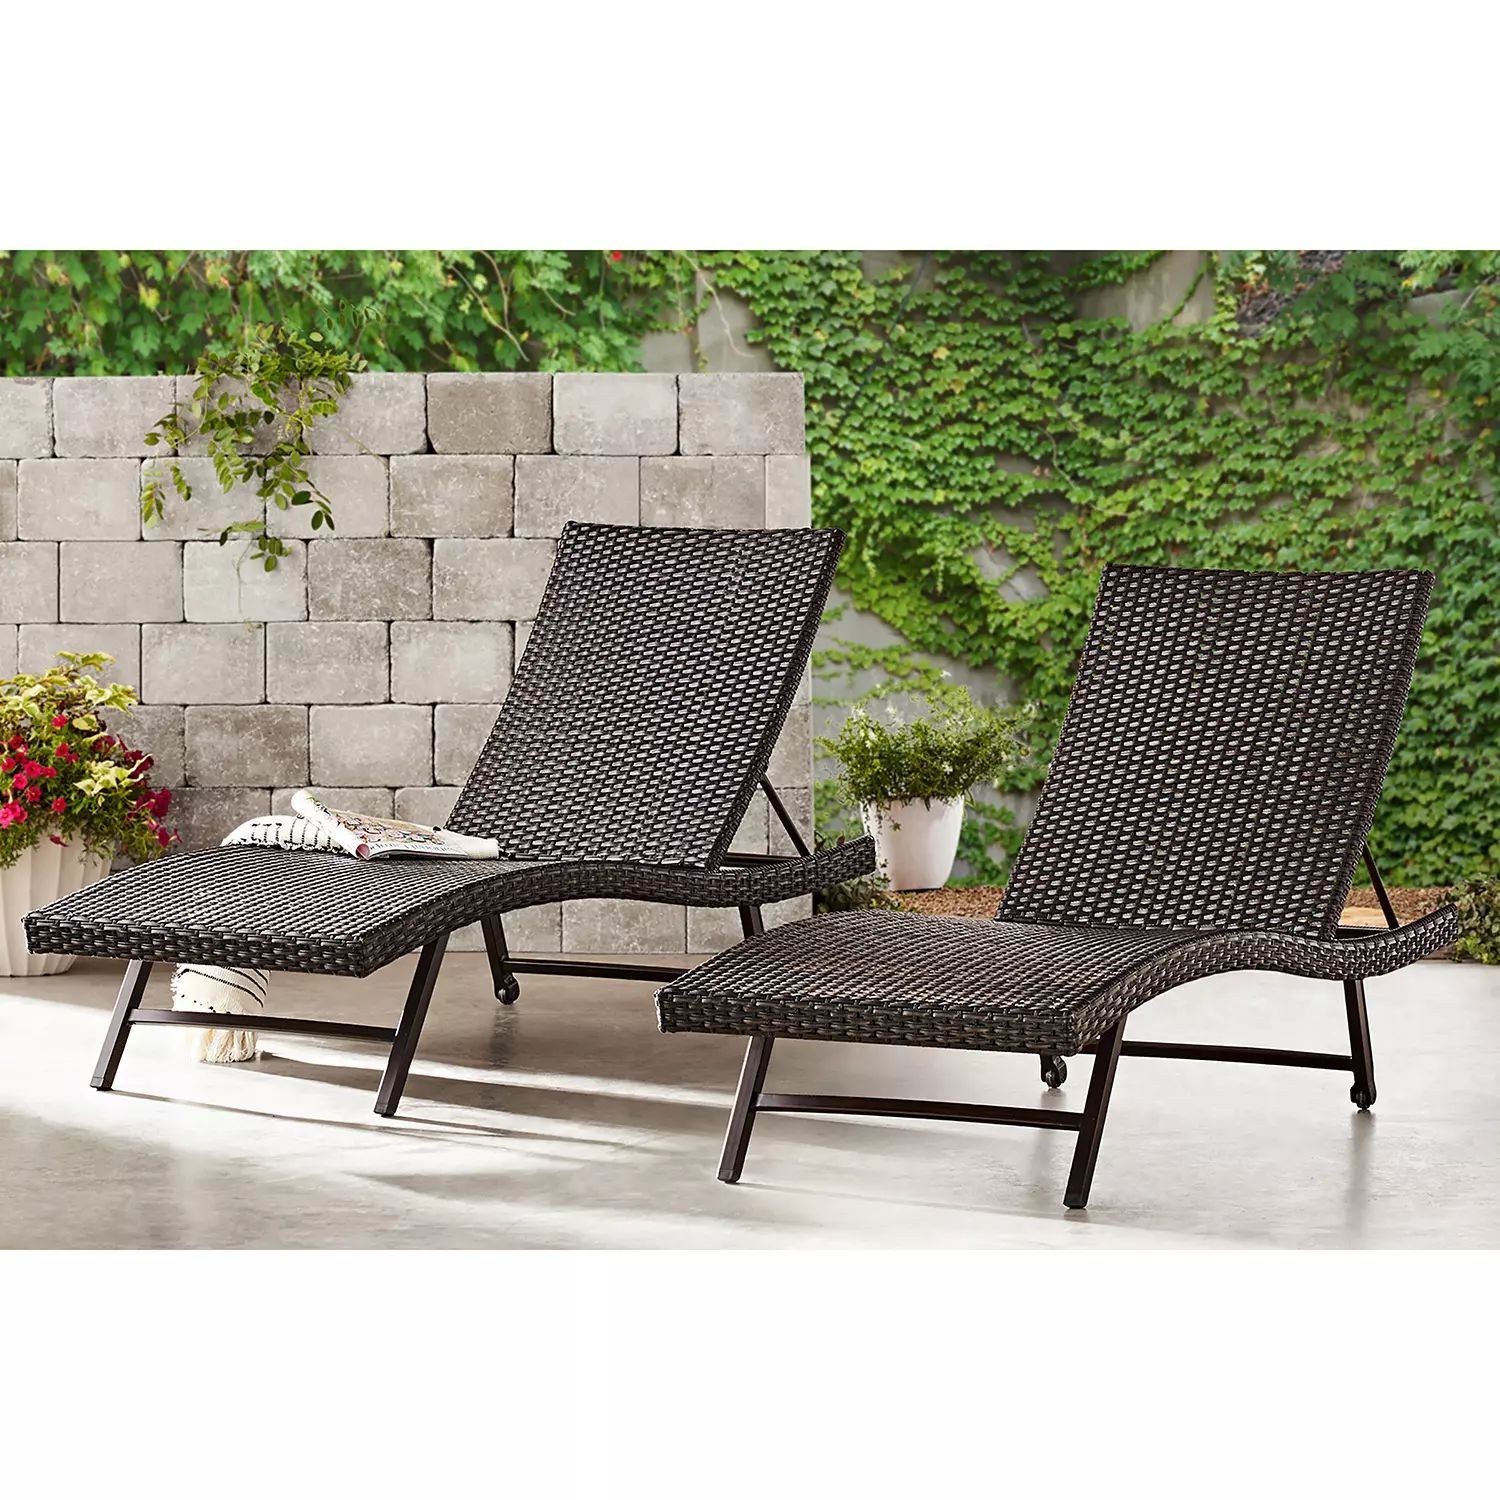 Member's Mark Agio Heritage Woven Chaise Lounge - 2-Pack | Sam's Club